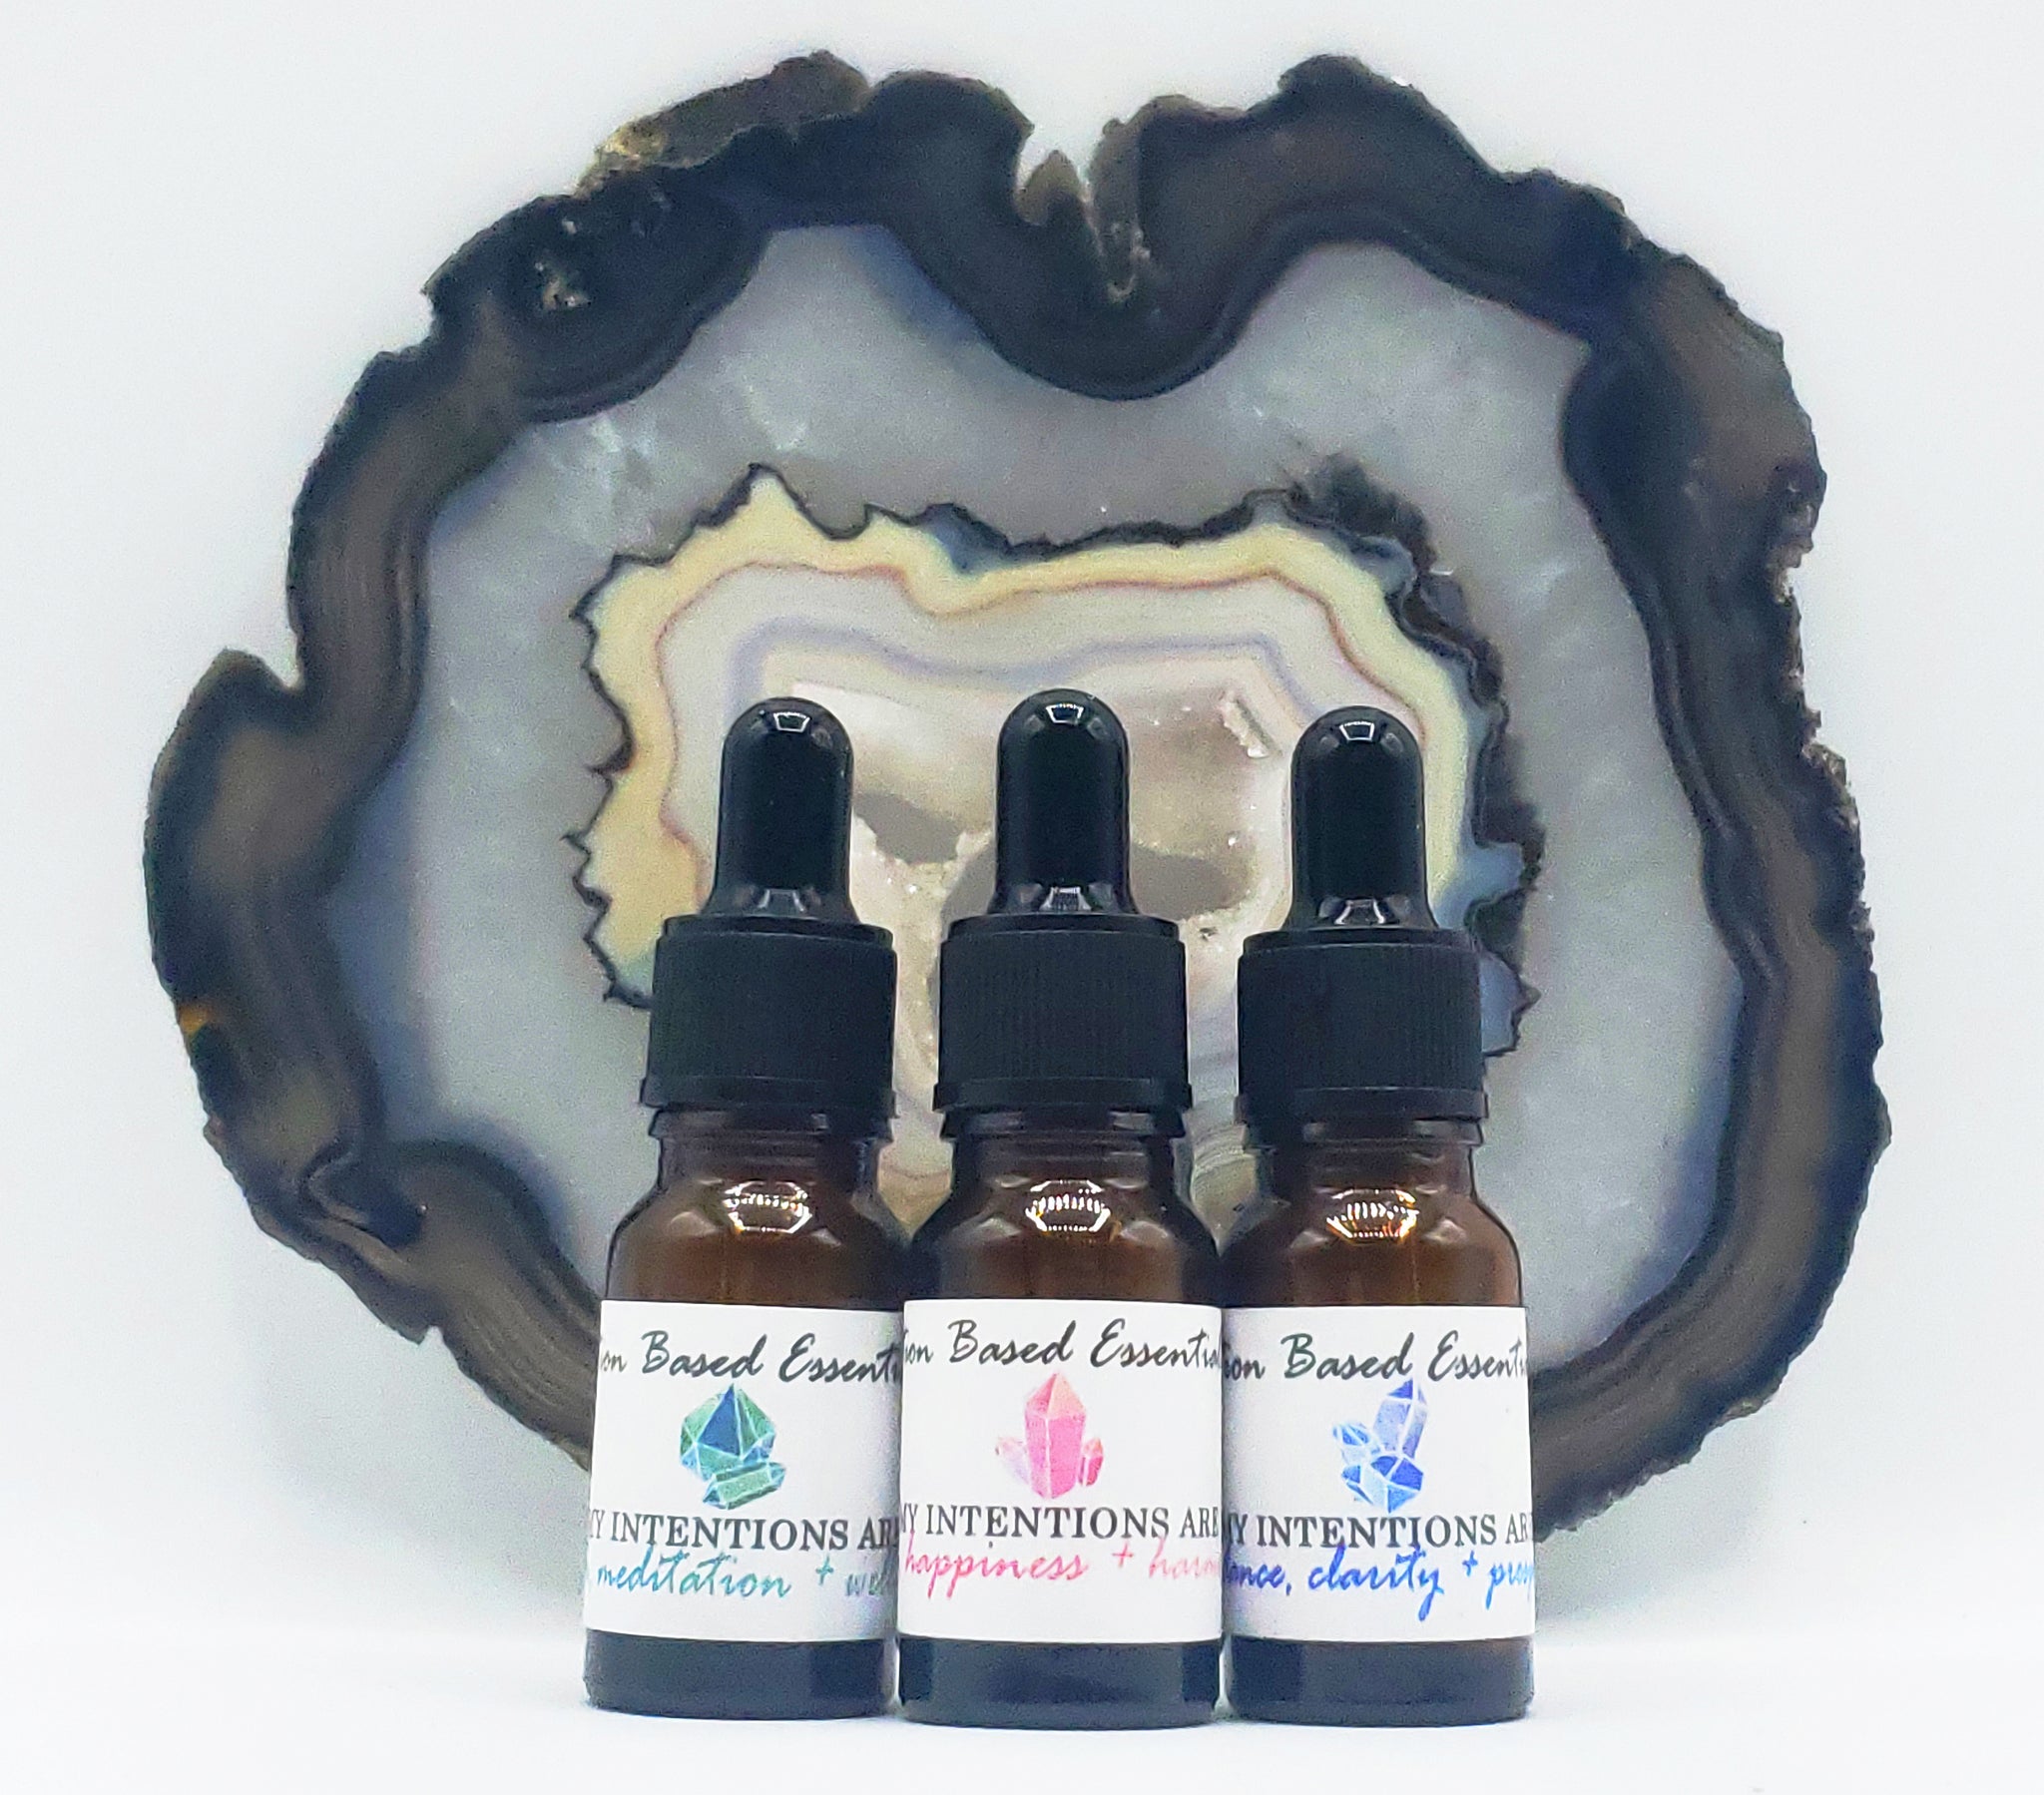 Love, Happiness + Harmony Intention Based Essential Oil.